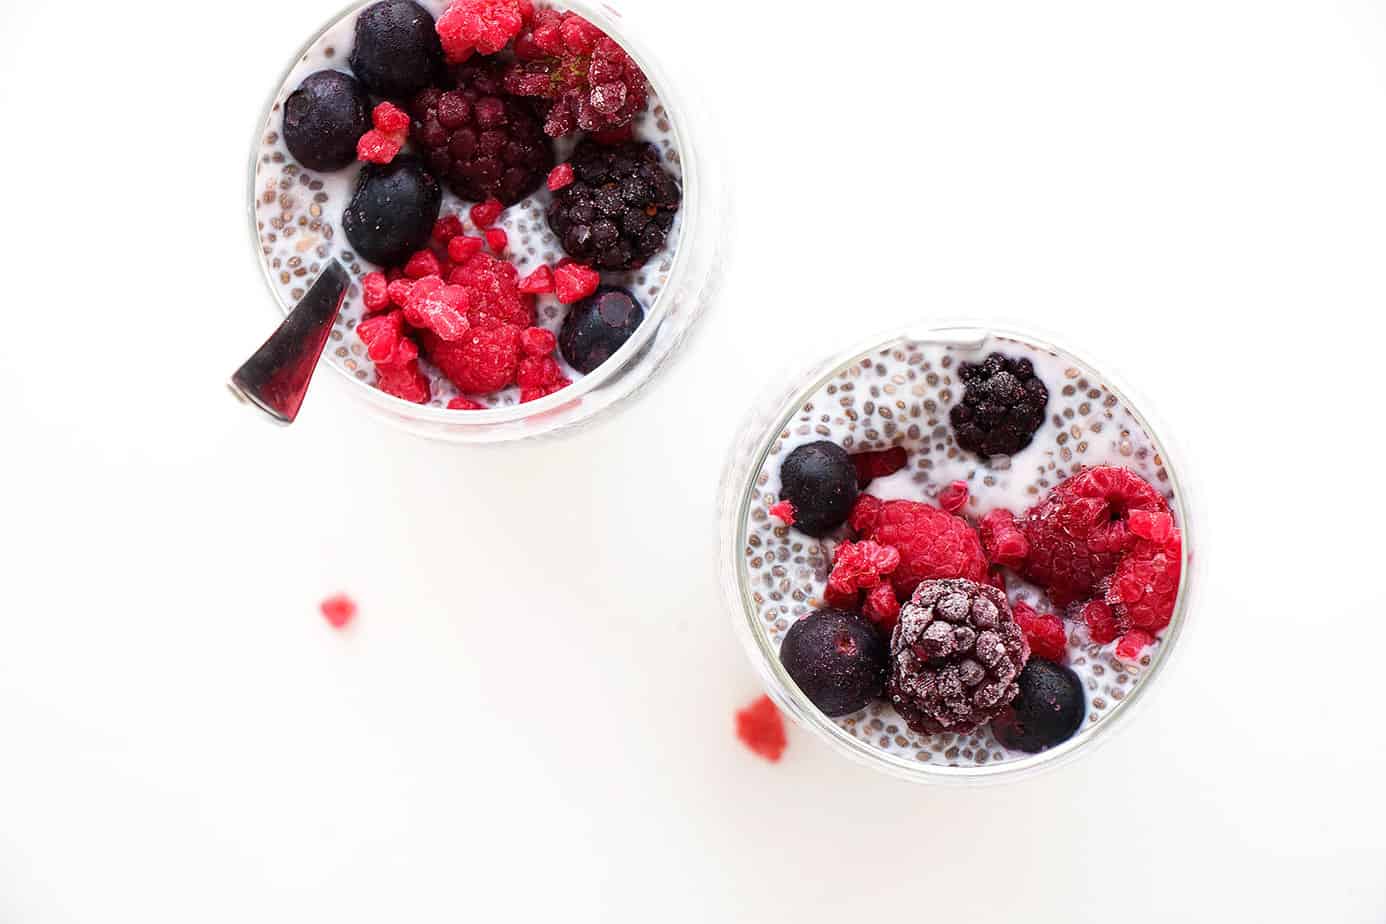 Chia pudding topped with frozen berries.